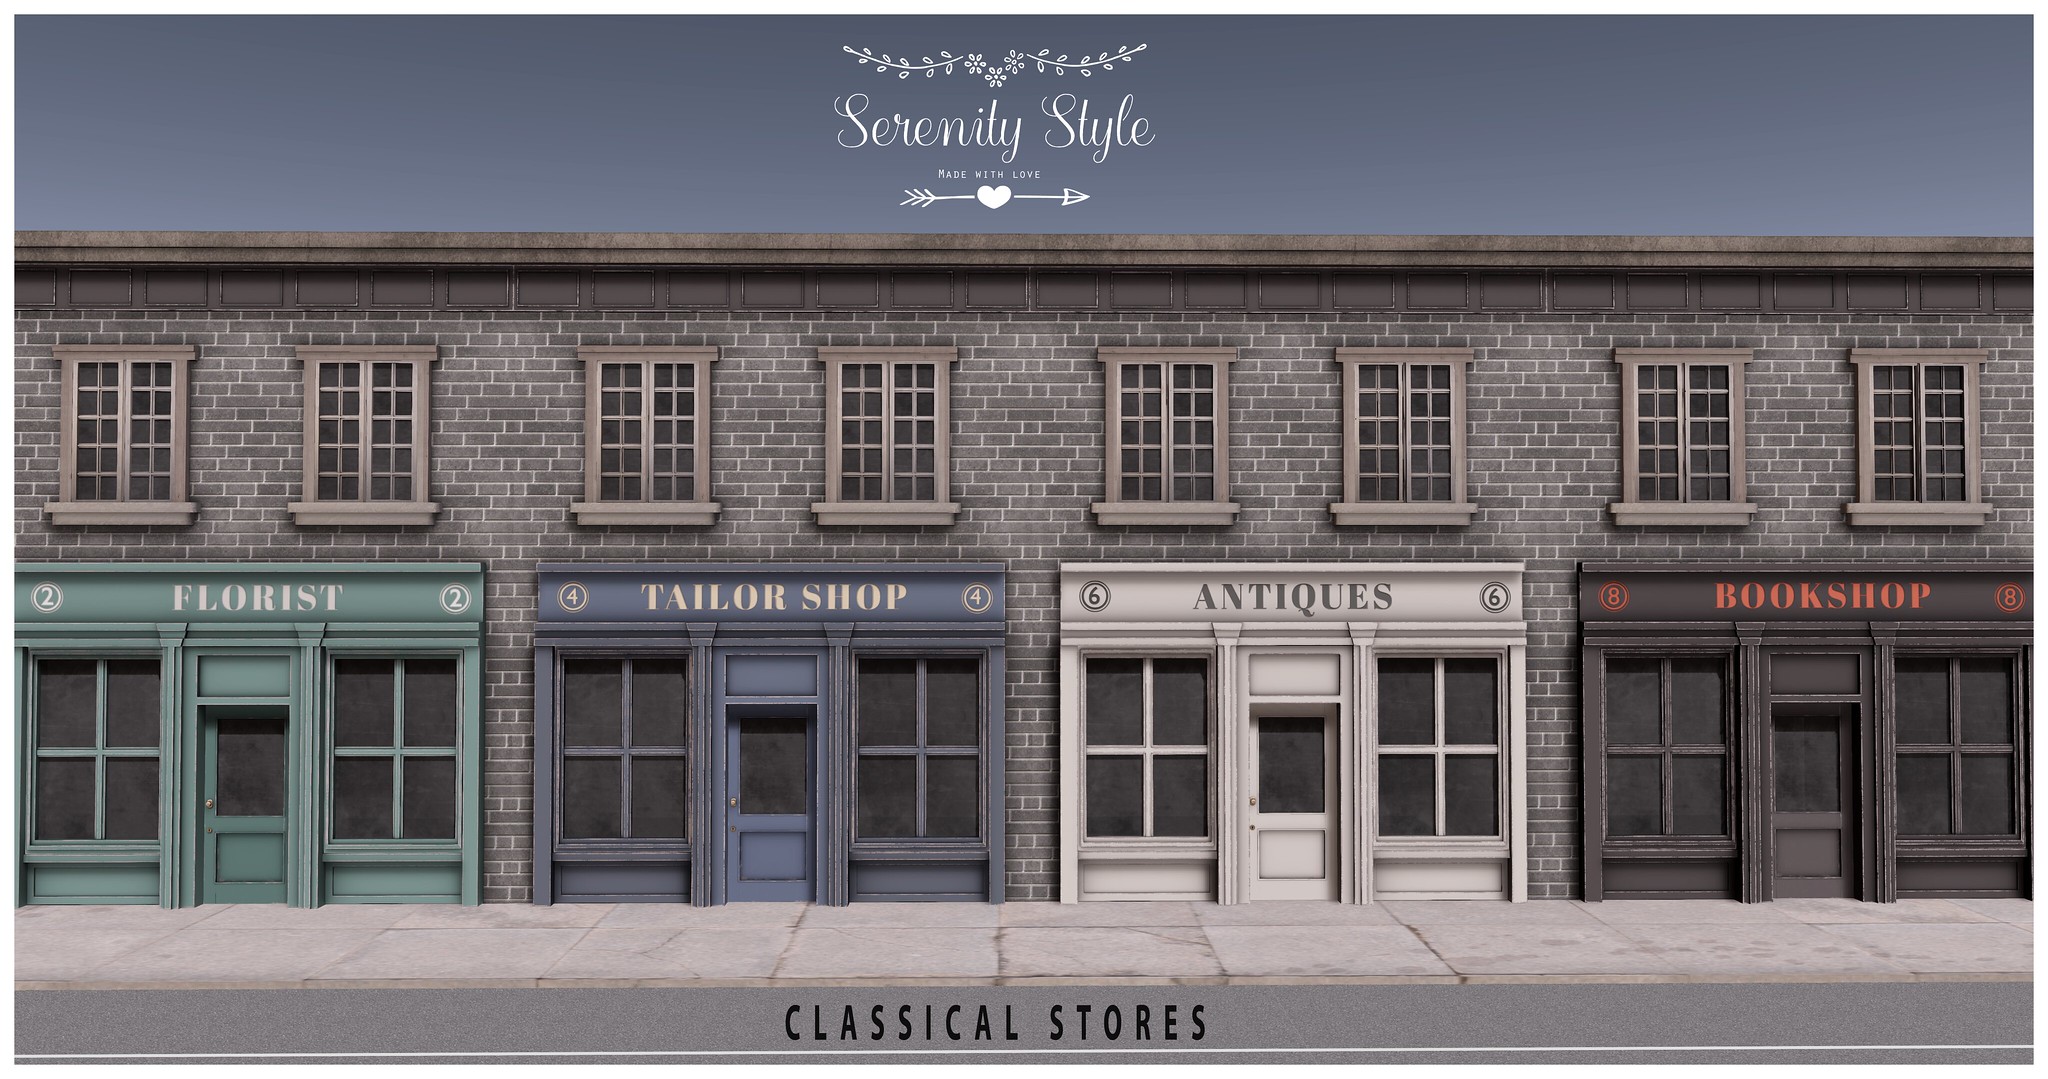 Serenity Style – Classical Stores